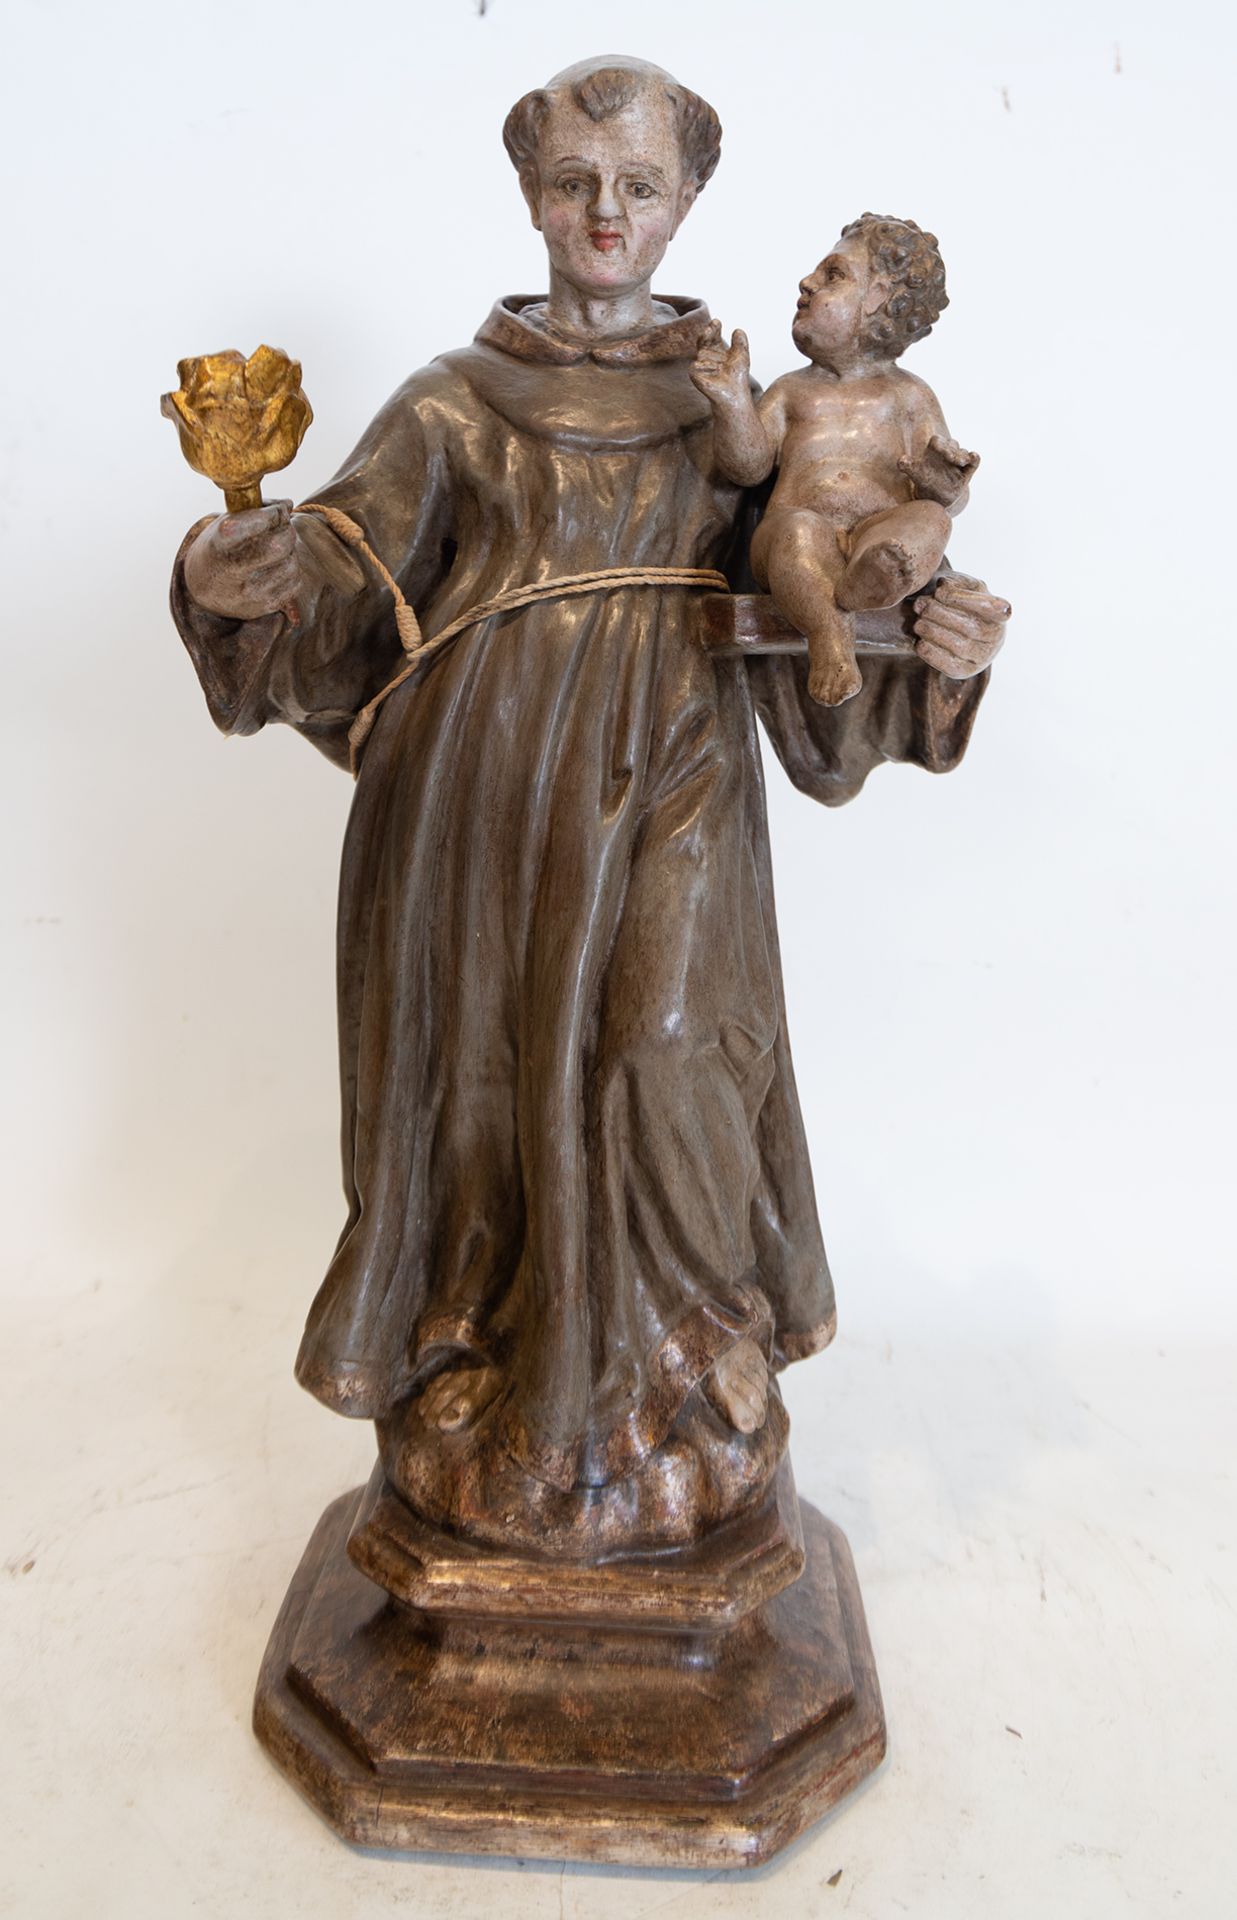 Saint Anthony with the Child in Arms, 18th century Granada school